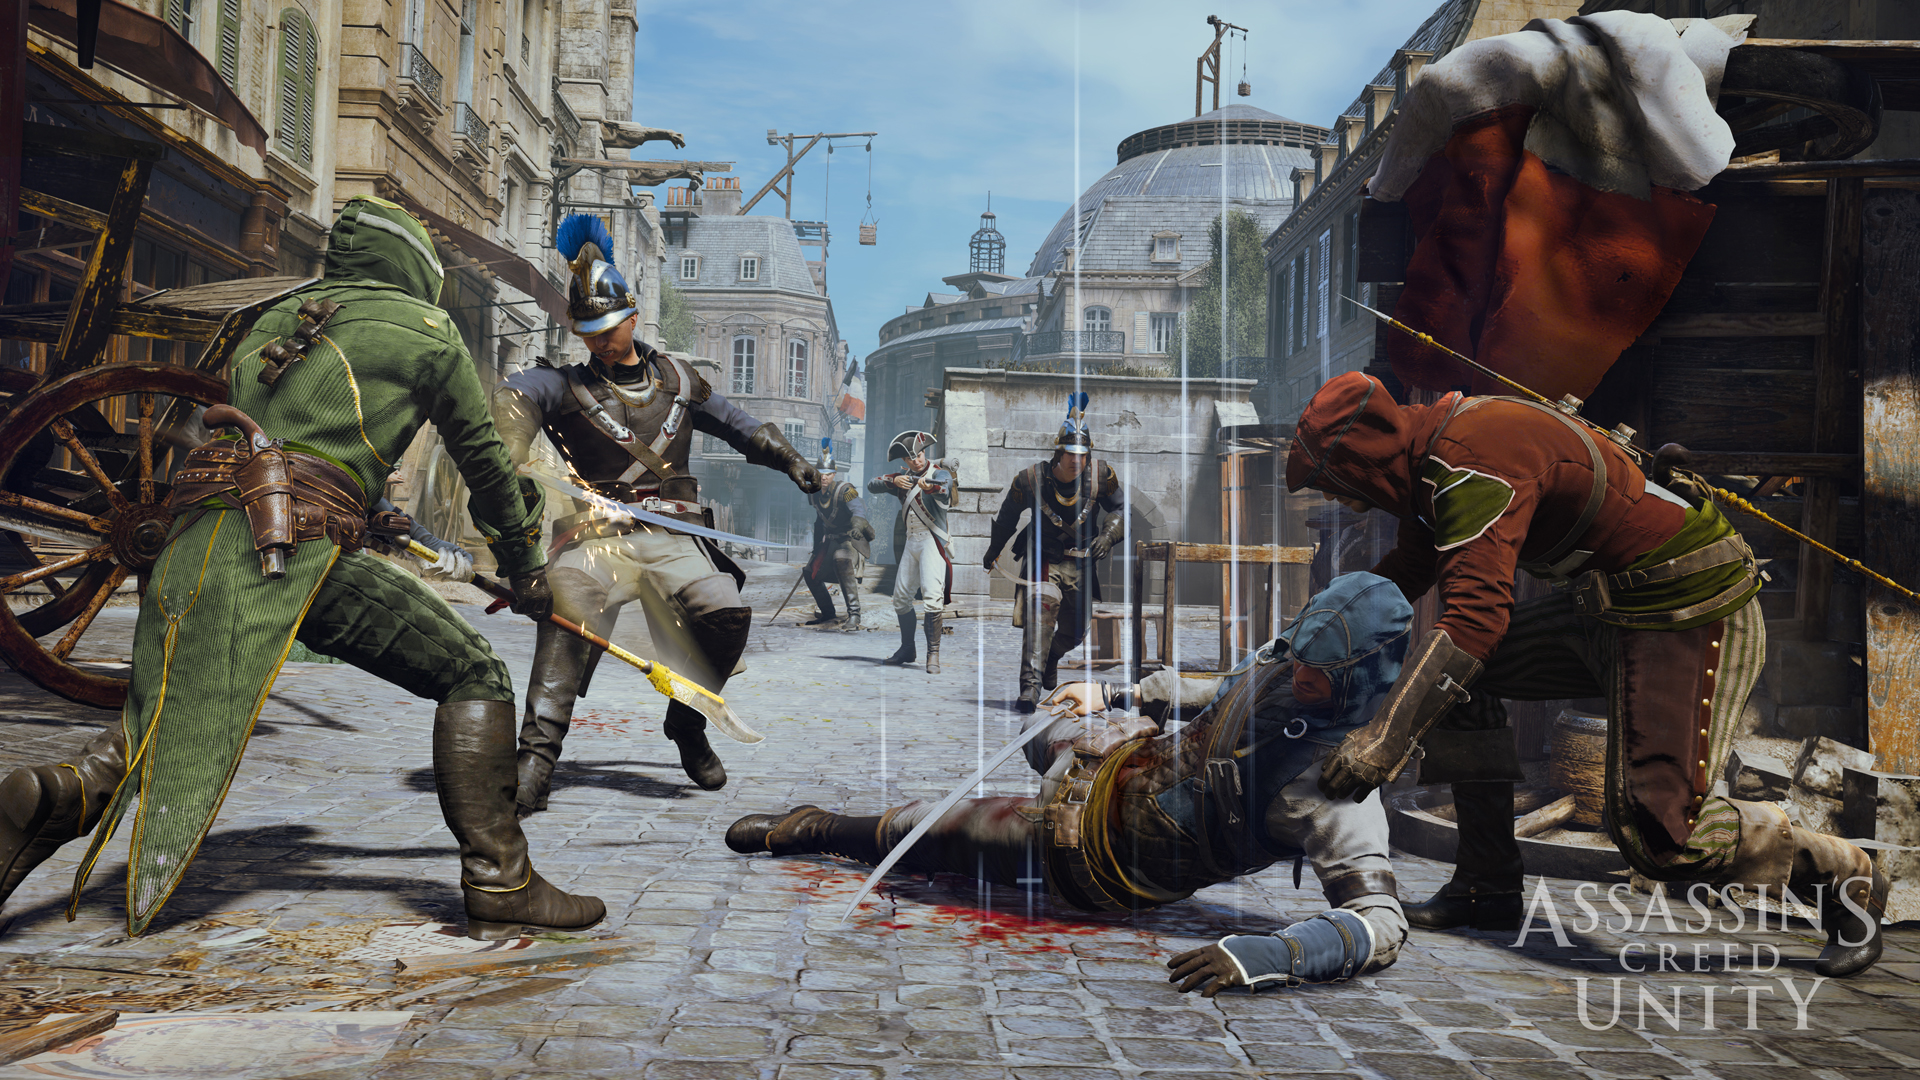 Assassin's Creed Unity Gallery #2